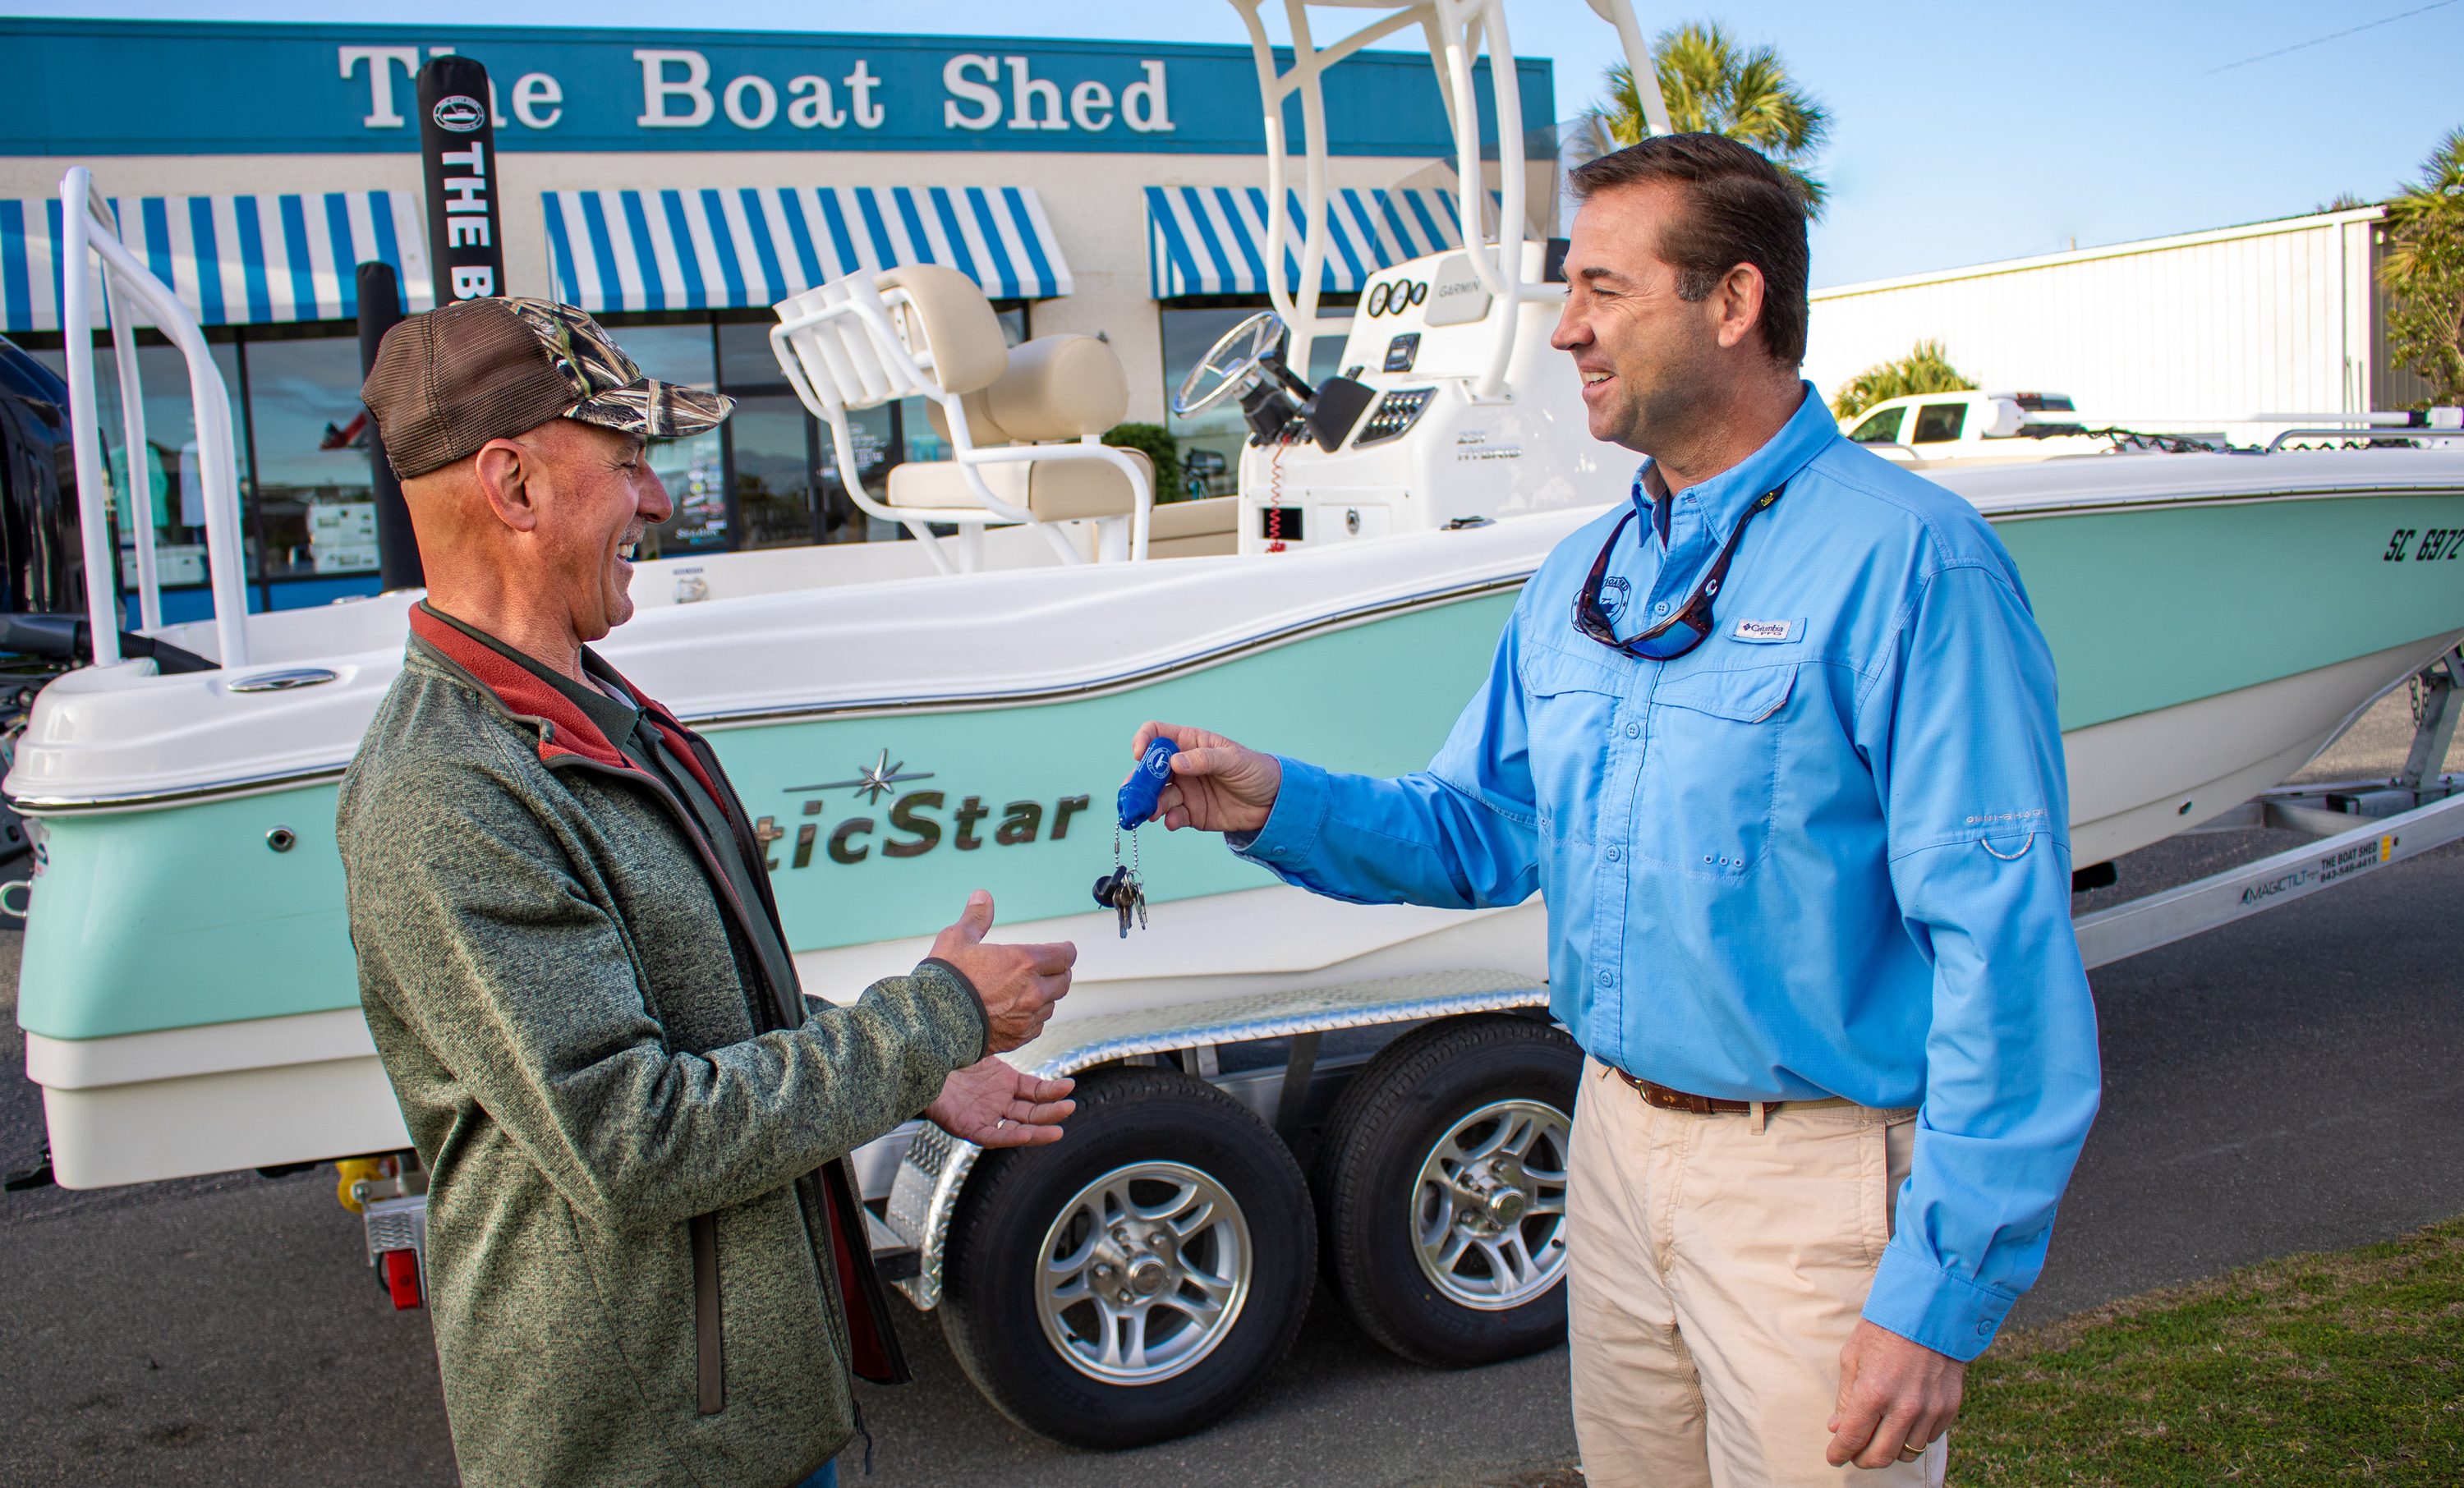 The Boat Shed Brokerage